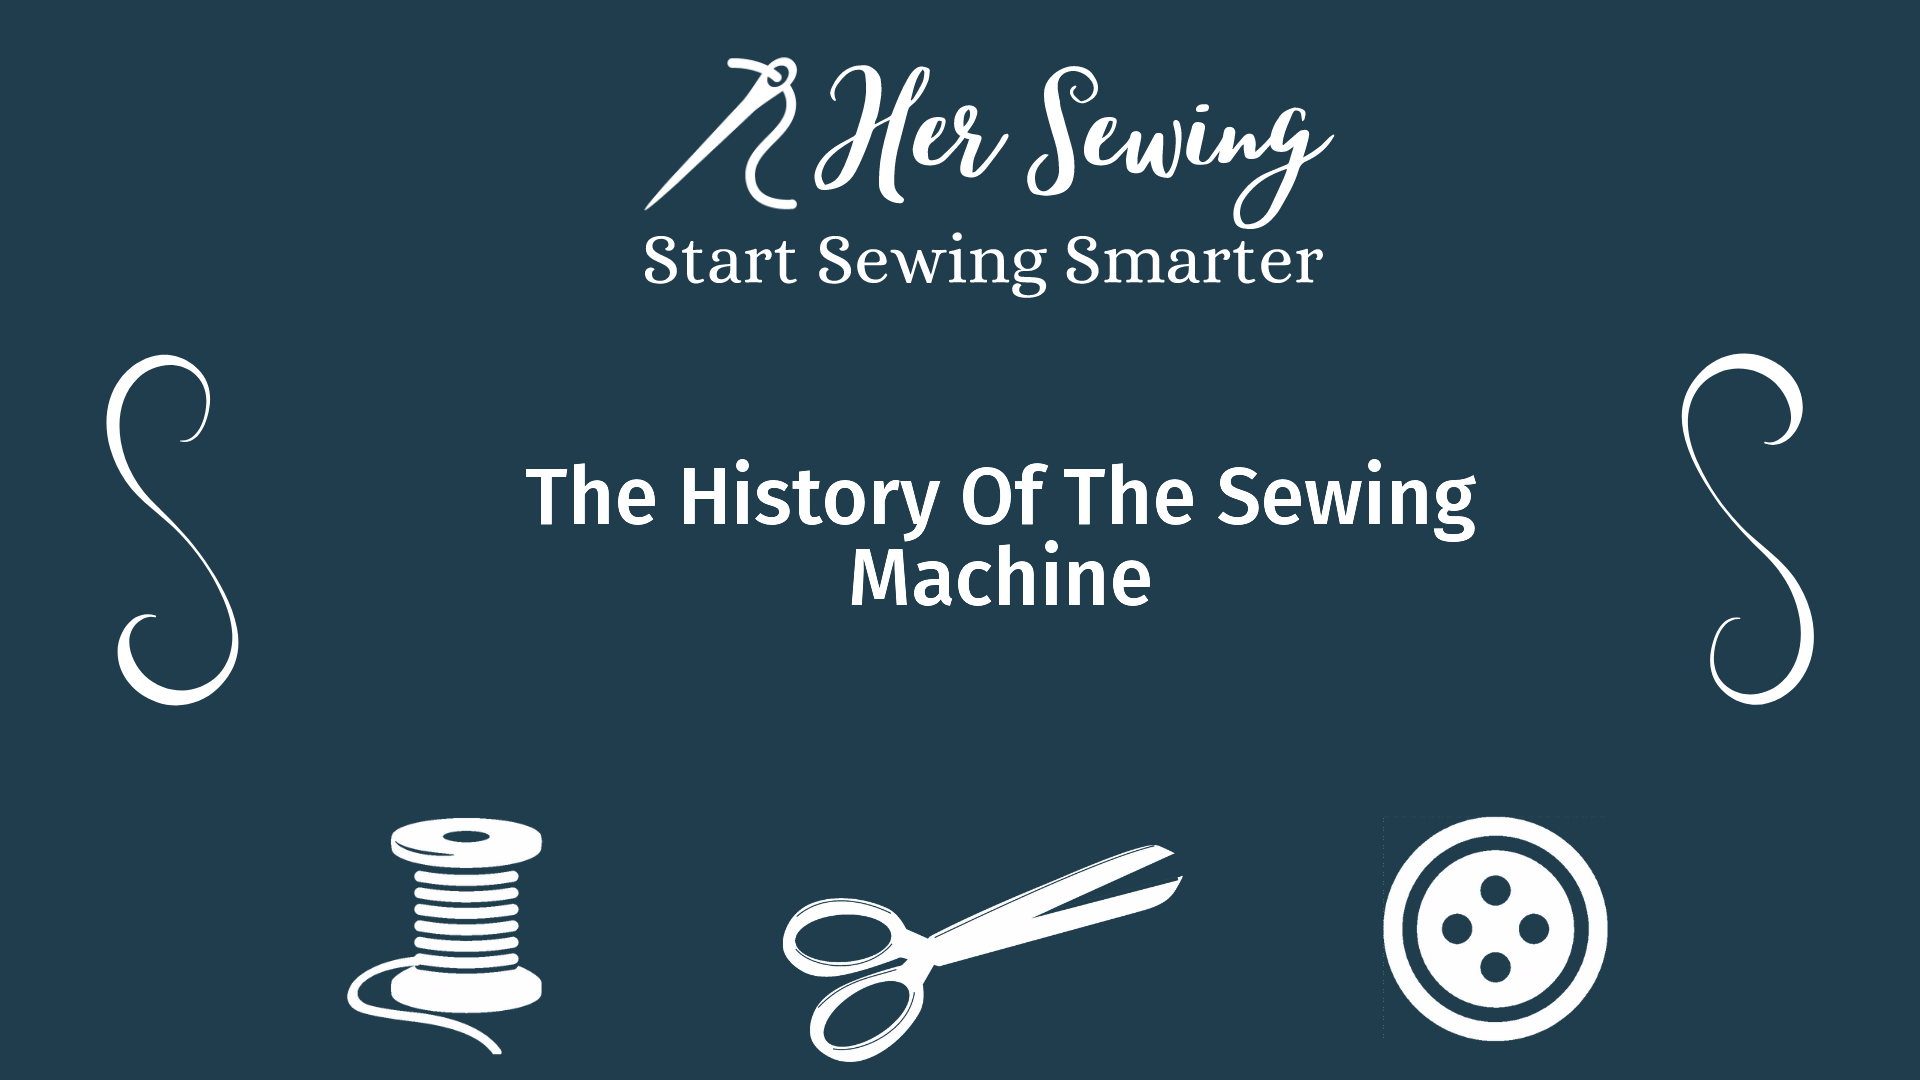 The History Of The Sewing Machine